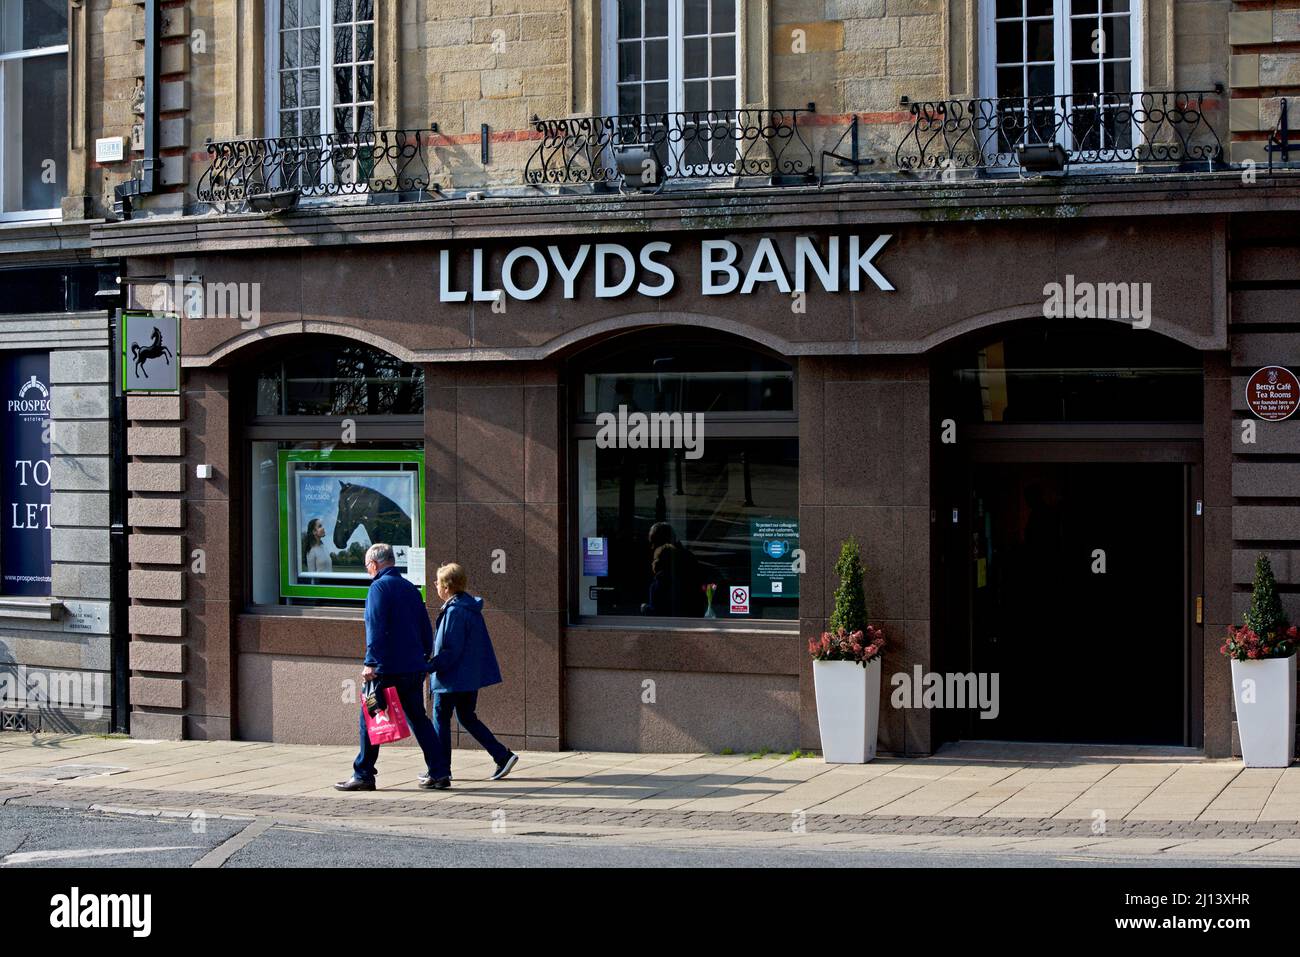 Man and woman walking past branch of Natwest bank, on Cambridge Crescent, Harrogate, North Yorkshire, England UK Stock Photo